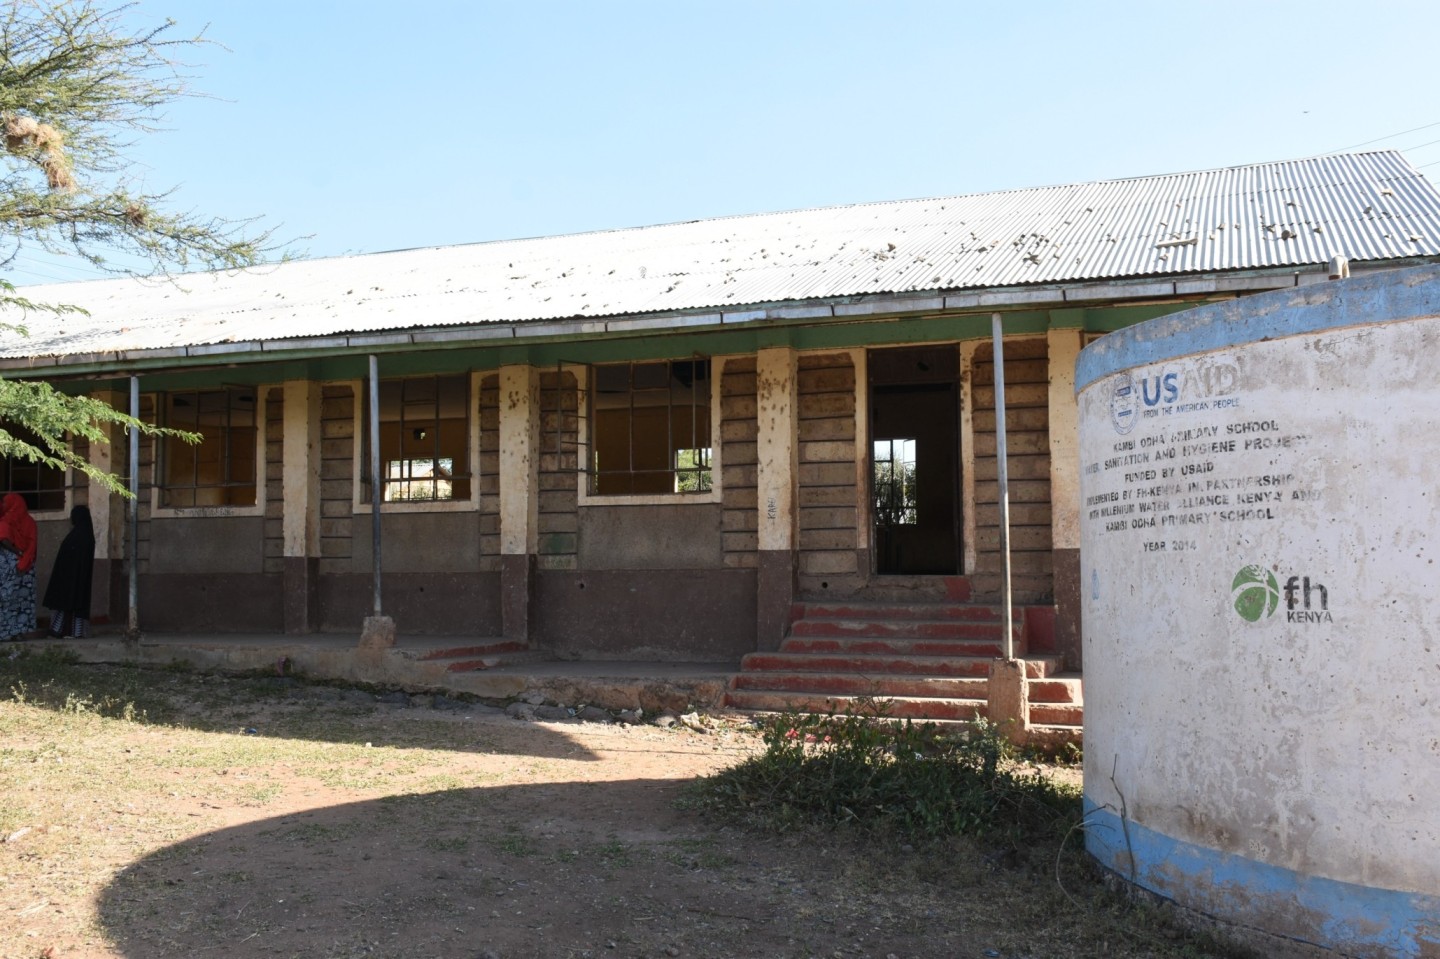 Surprisingly, for more than a decade that the school has existed, it has yet to be registered as a public institution